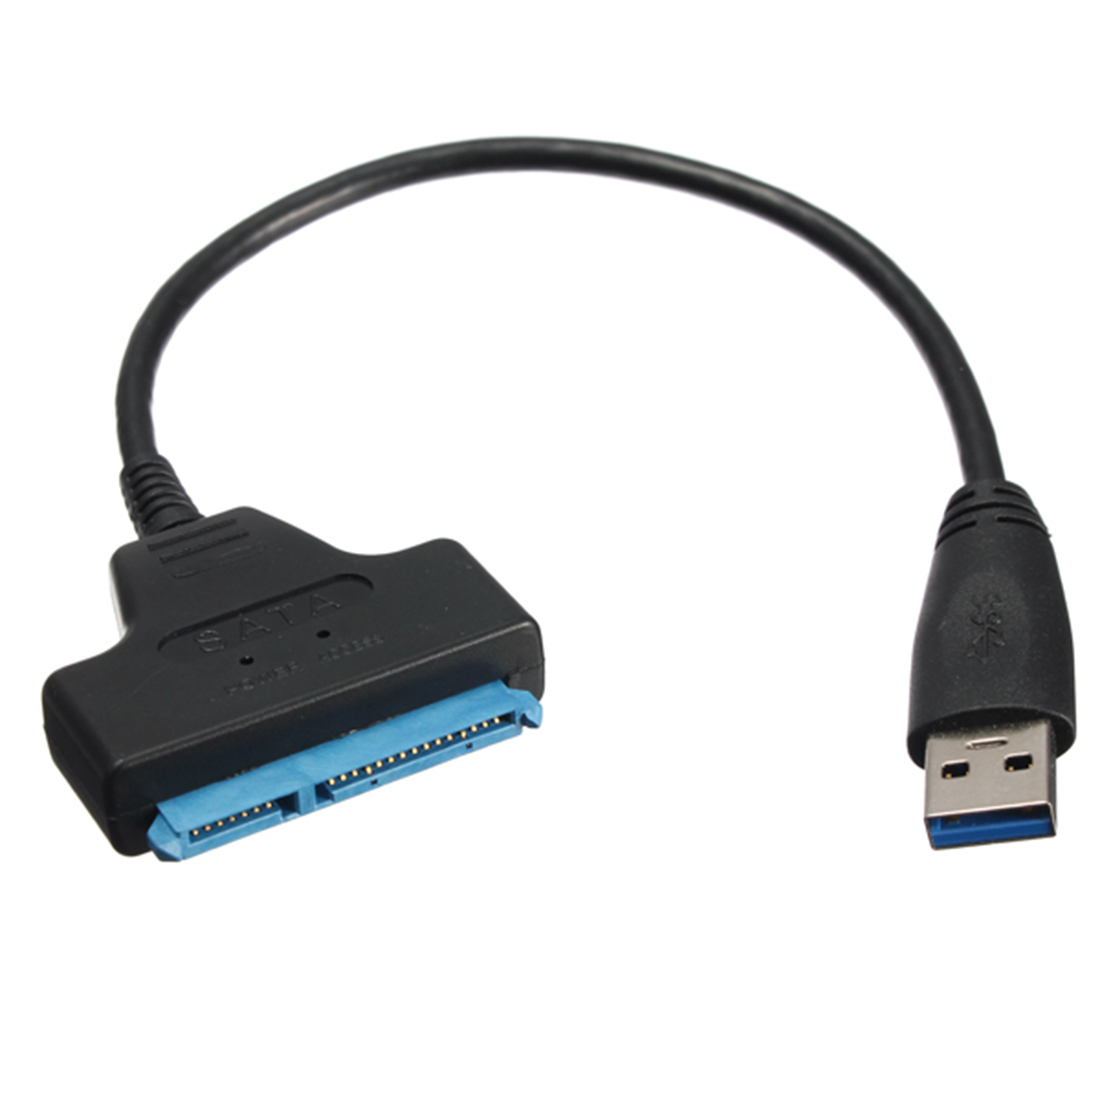 Super speed USB3.0 A Sata 22 Pin Adapter Cable For 2.5inch SSD Hard Disk Drive
